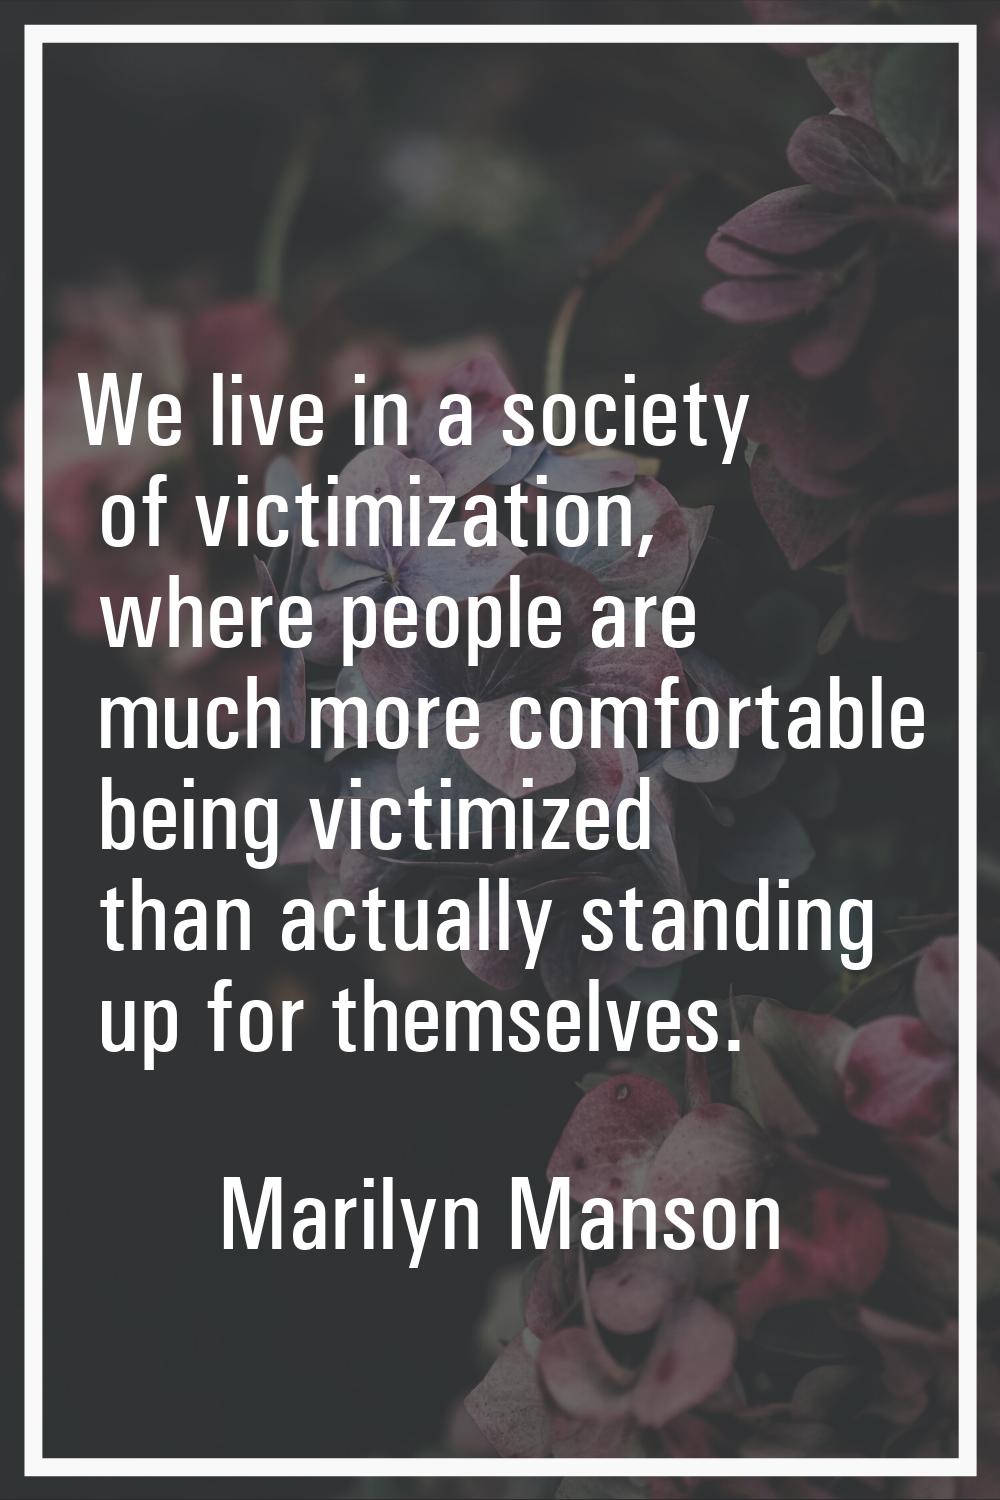 We live in a society of victimization, where people are much more comfortable being victimized than